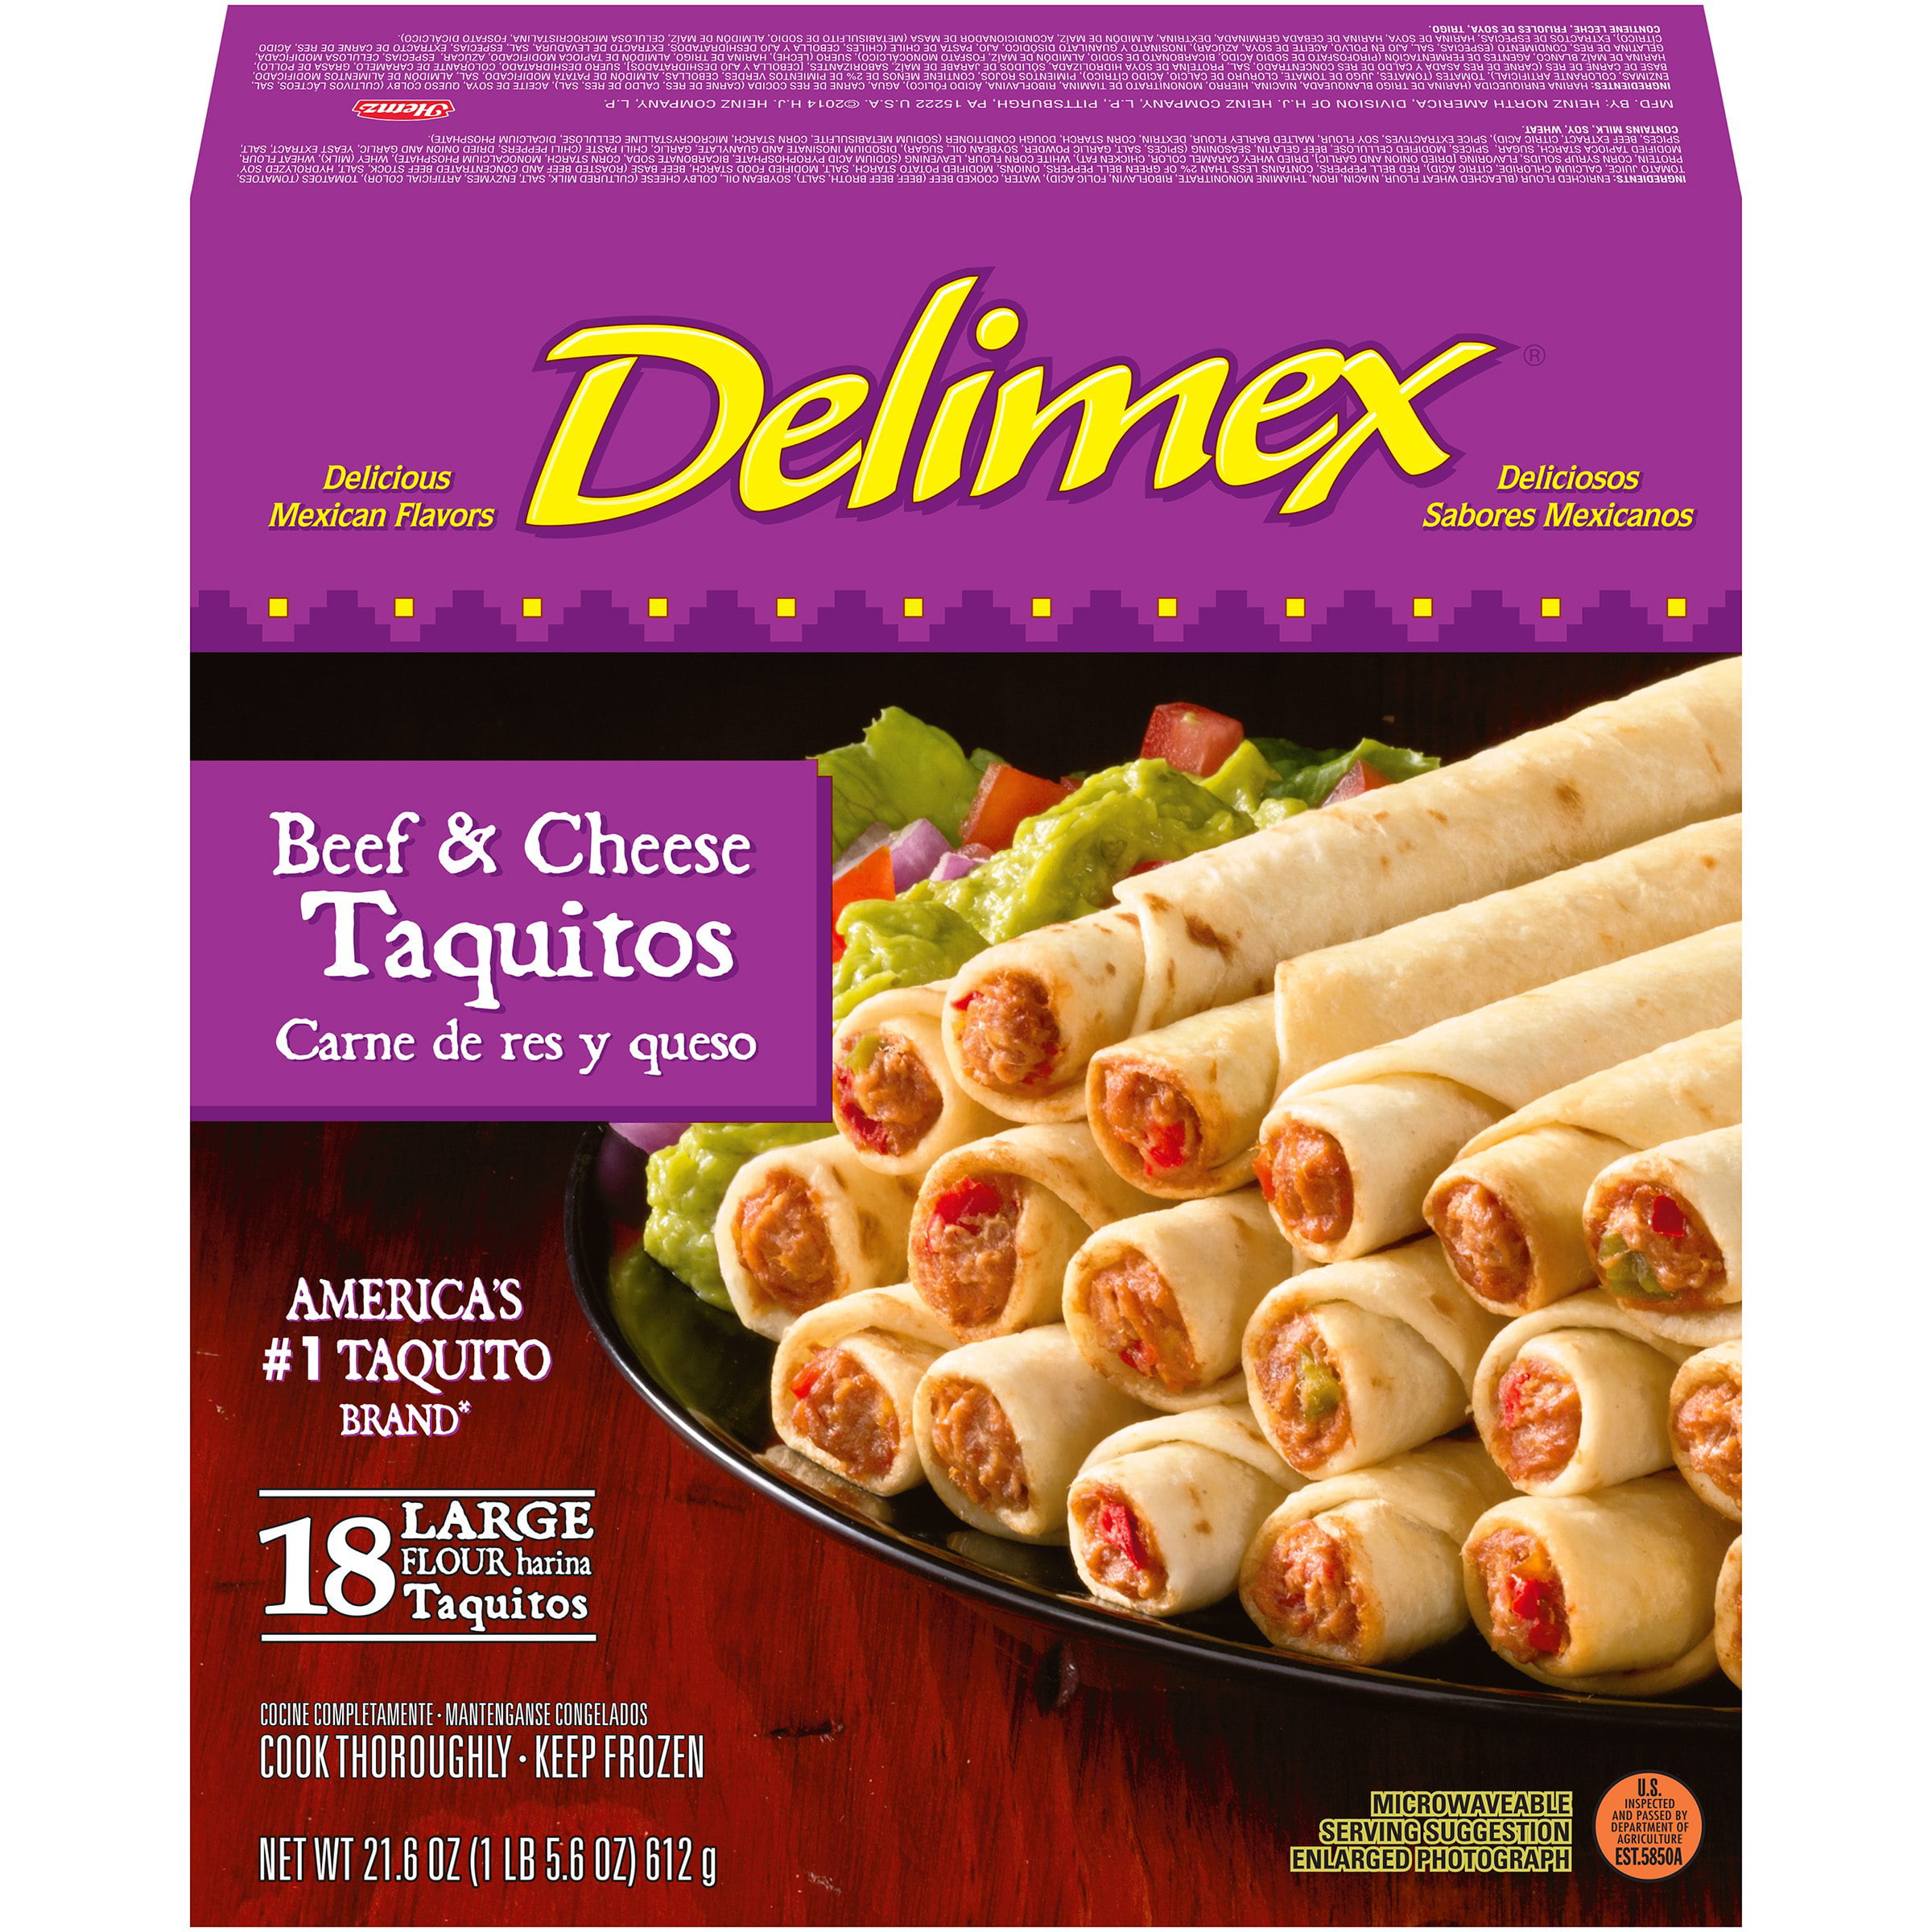 Delimex Beef And Cheese Taquitos Nutrition Facts | Besto Blog